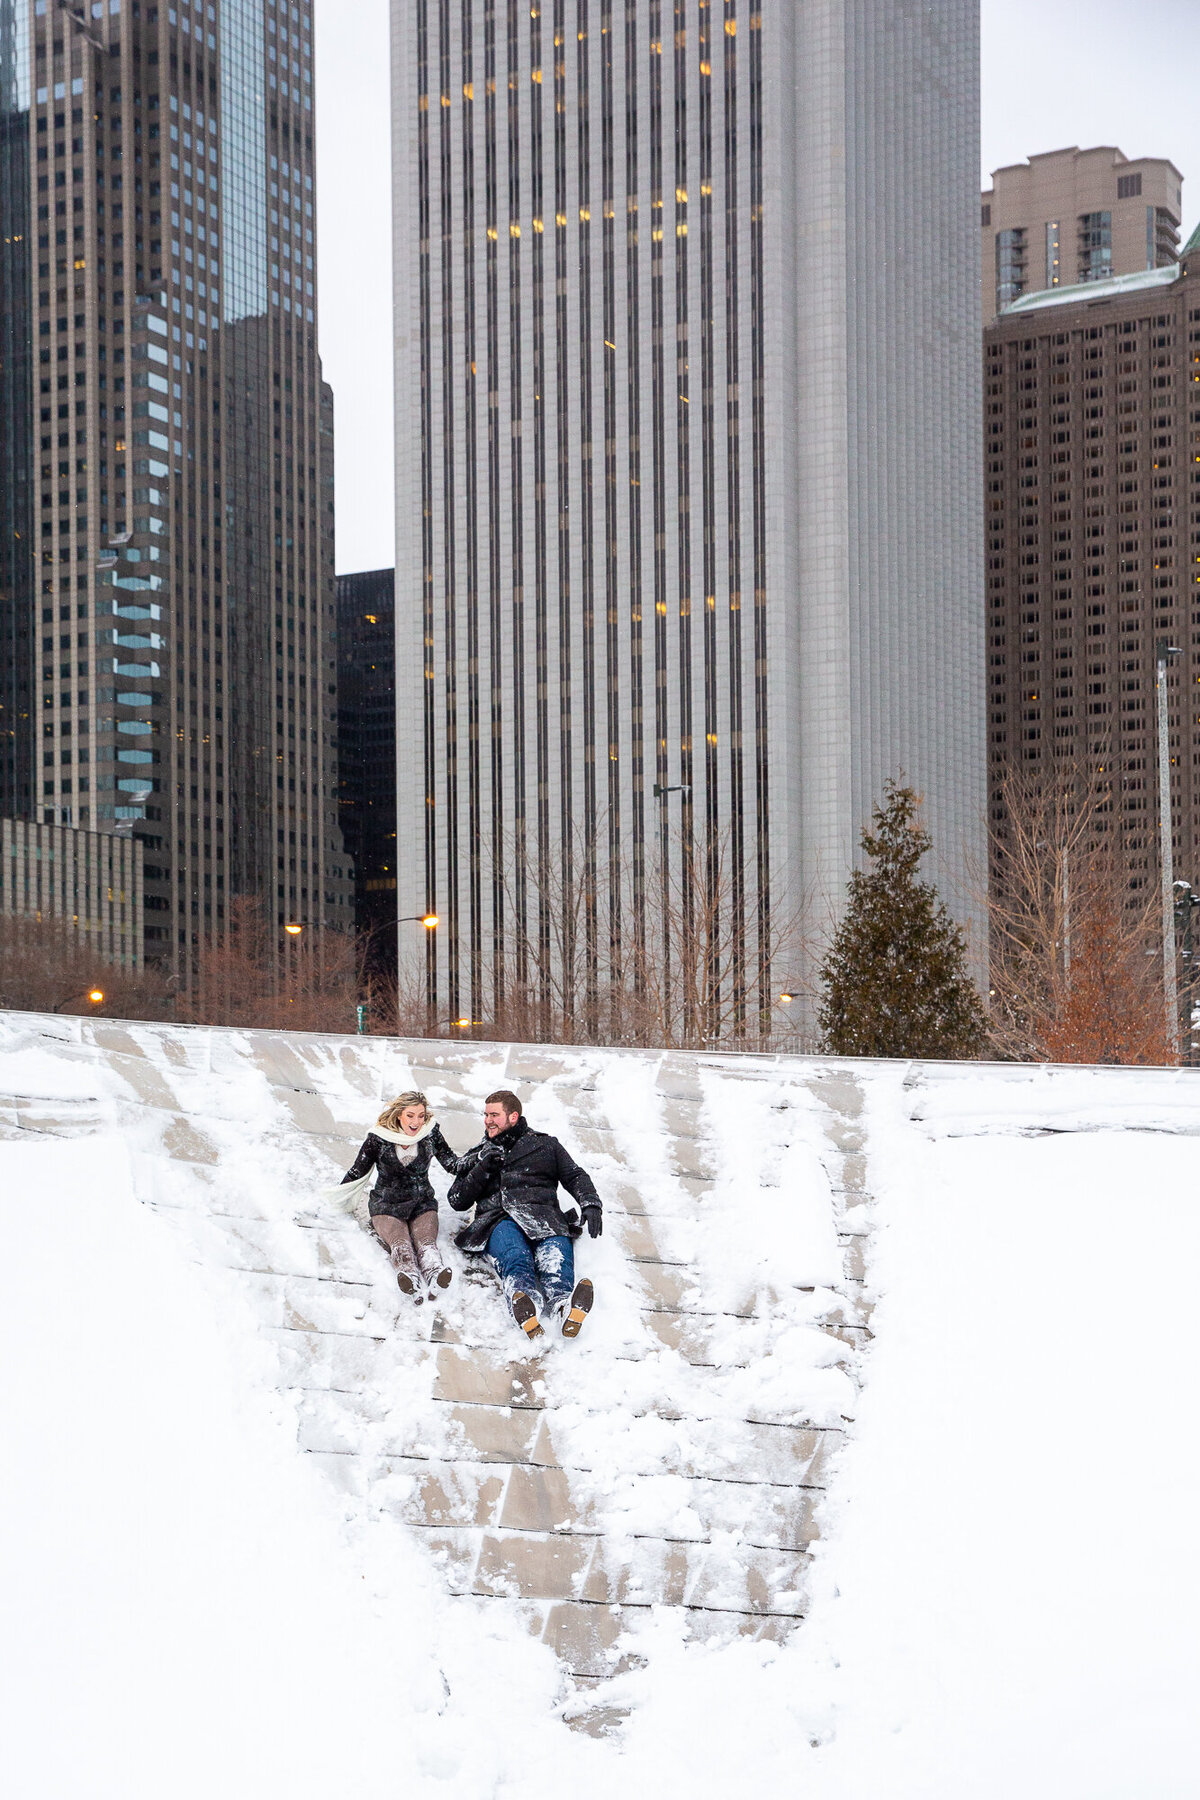 An Chicago city engagement photo session in the winter snow.